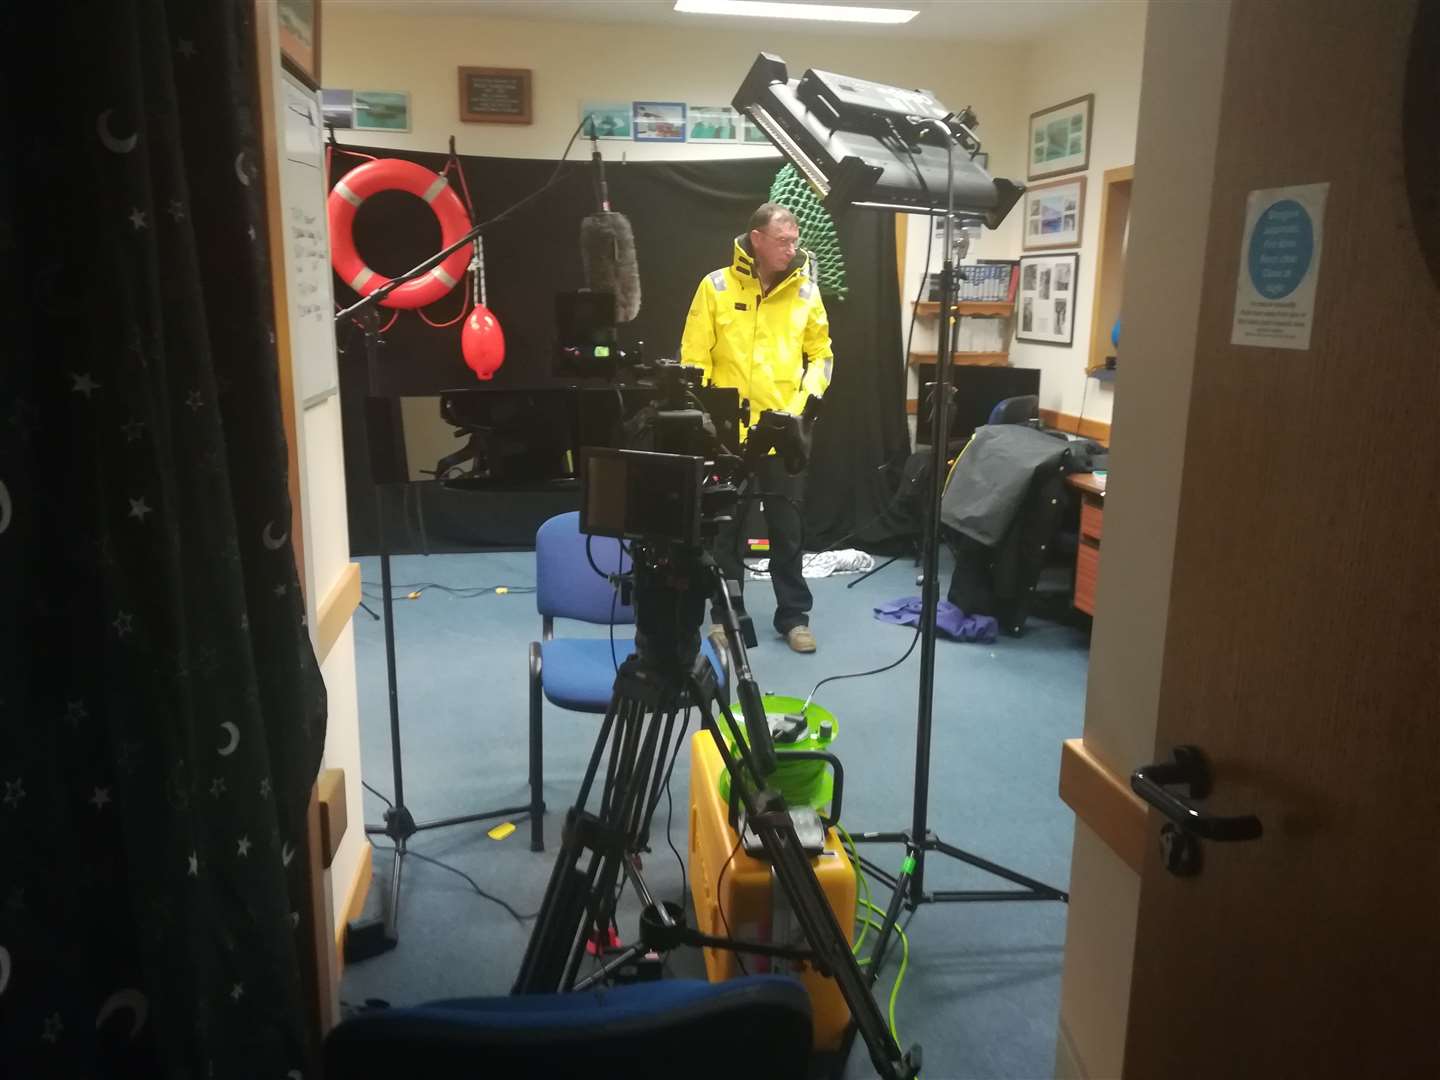 Lifeboat crews welcomed film-makers into their day-to-day lives during the making of the BBC series.